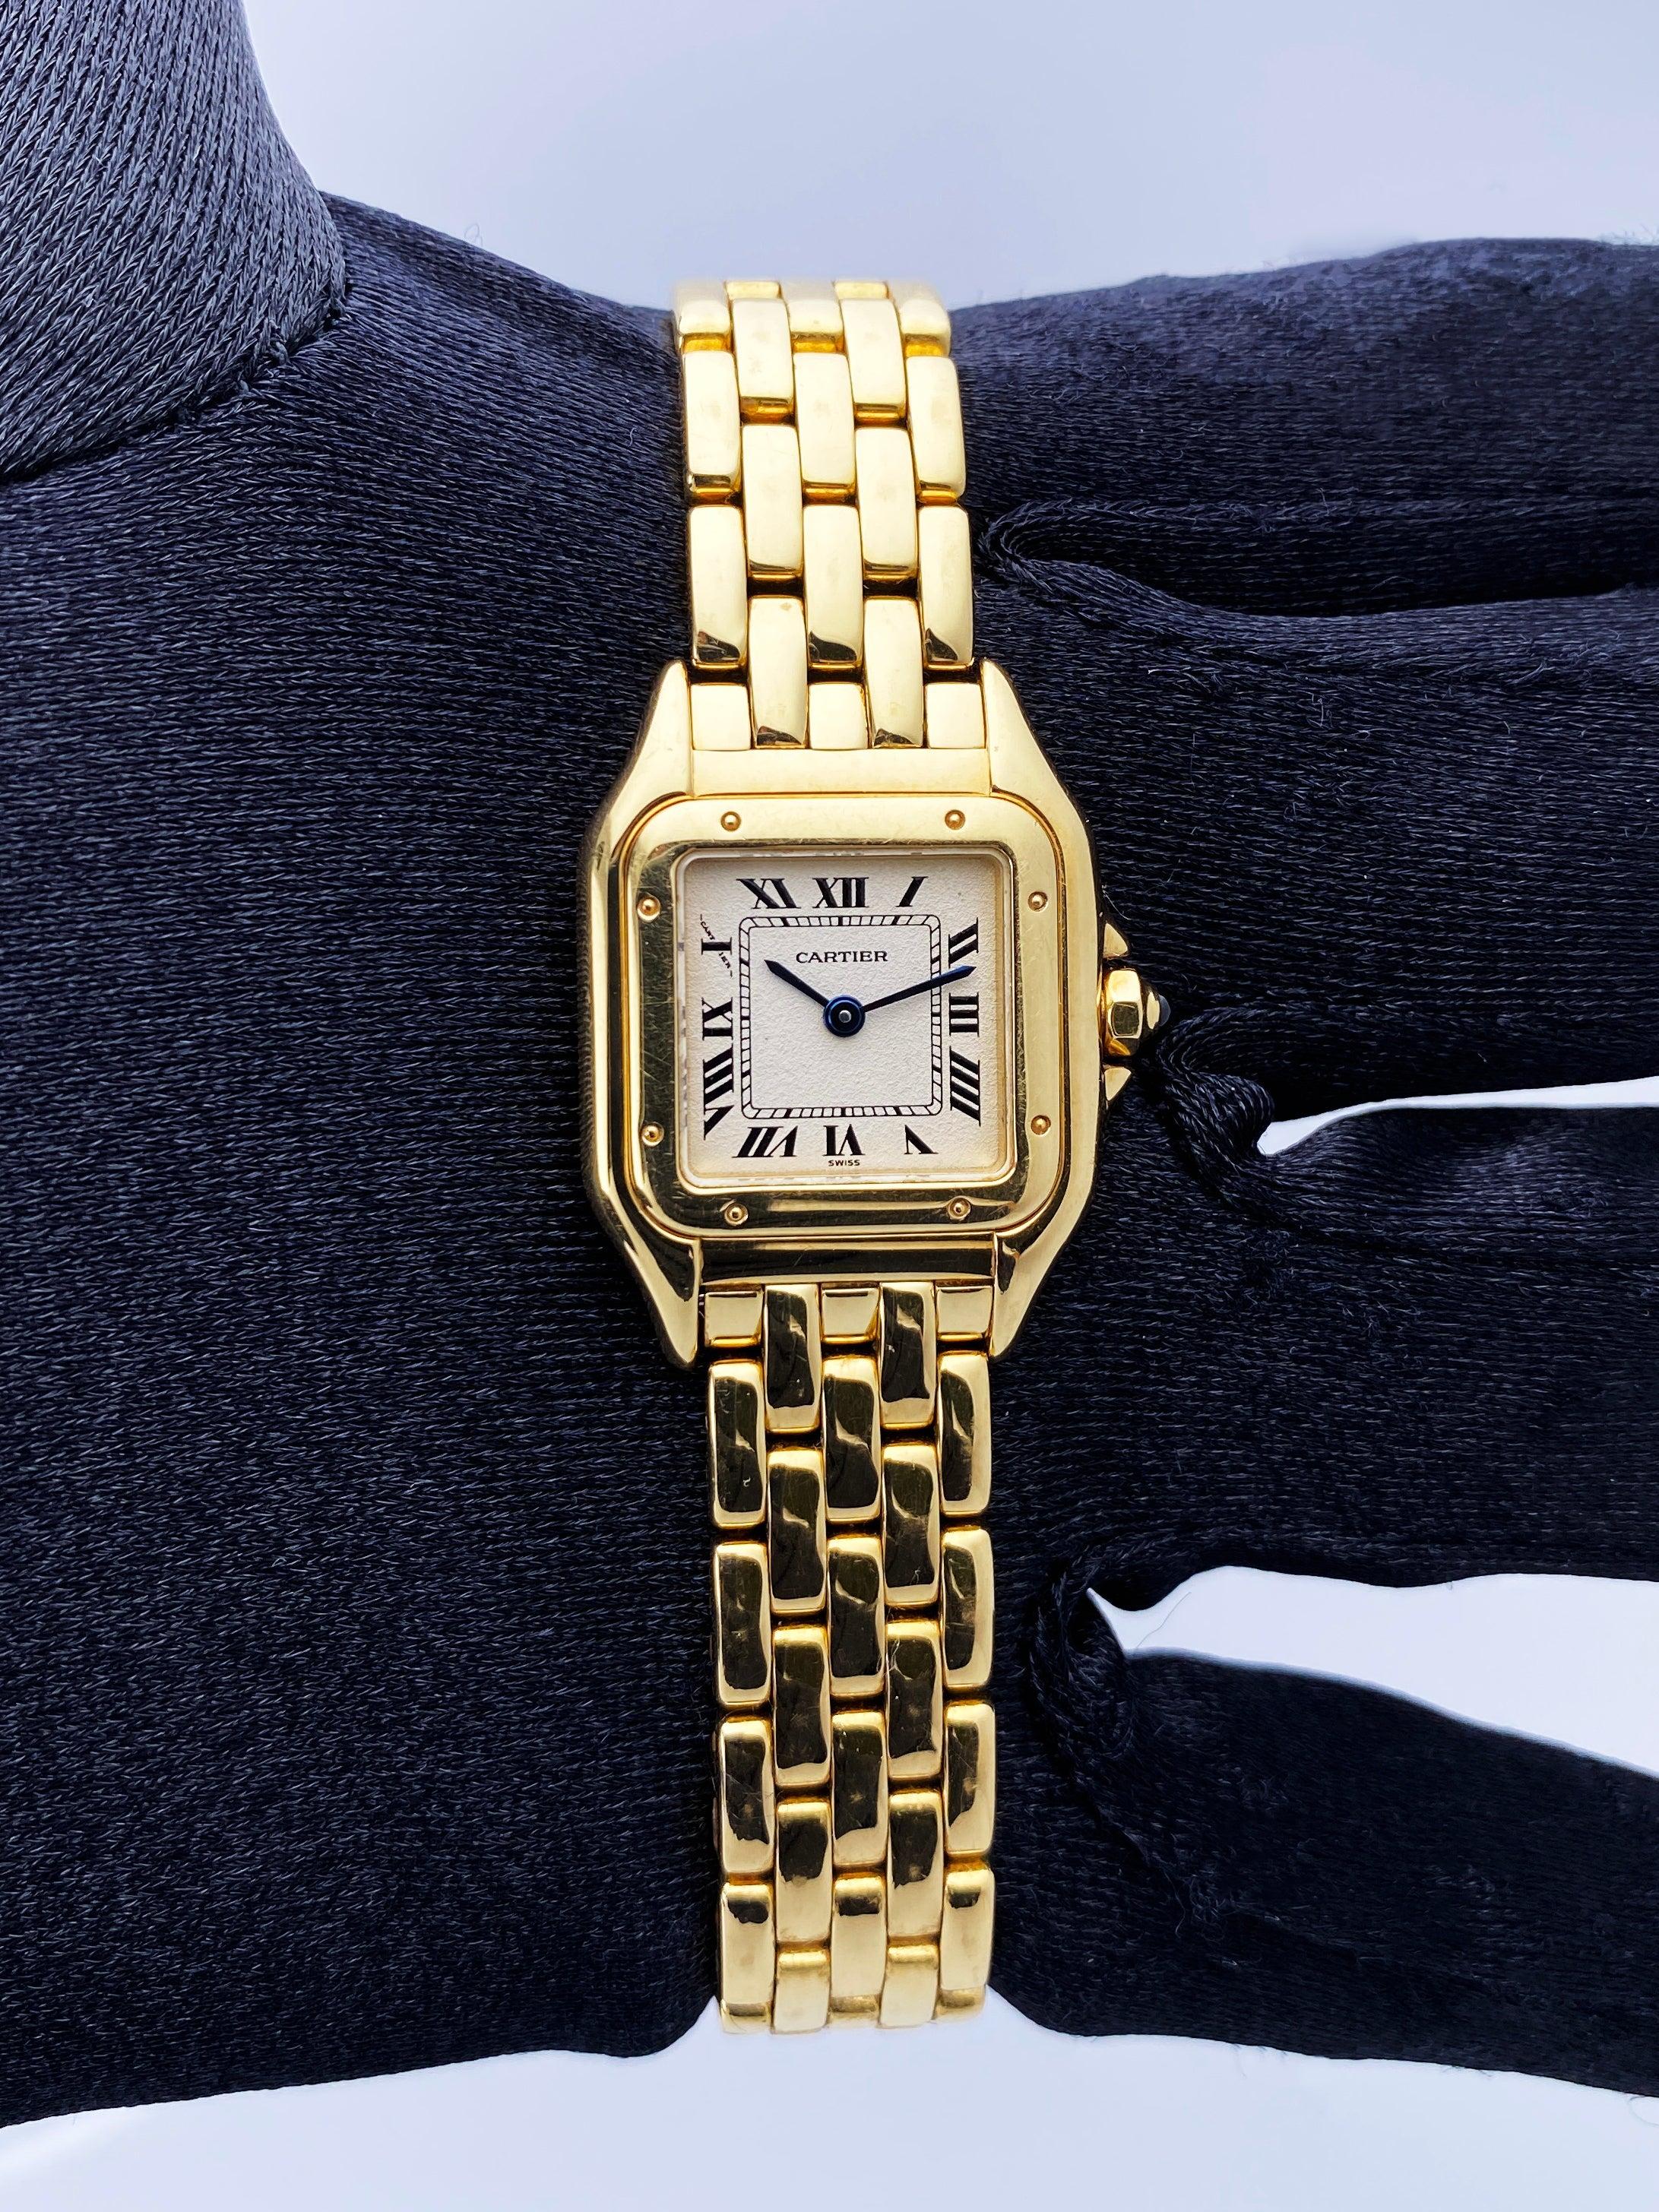 Cartier Panthere 1070 Ladies Watch. 22mm 18K yellow gold case. 18K yellow gold smooth bezel. Off-white dial with blue steel hands and Roman numeral hour markers. Minute markers on the inner dial. 18K yellow gold bracelet with hidden butterfly clasp.